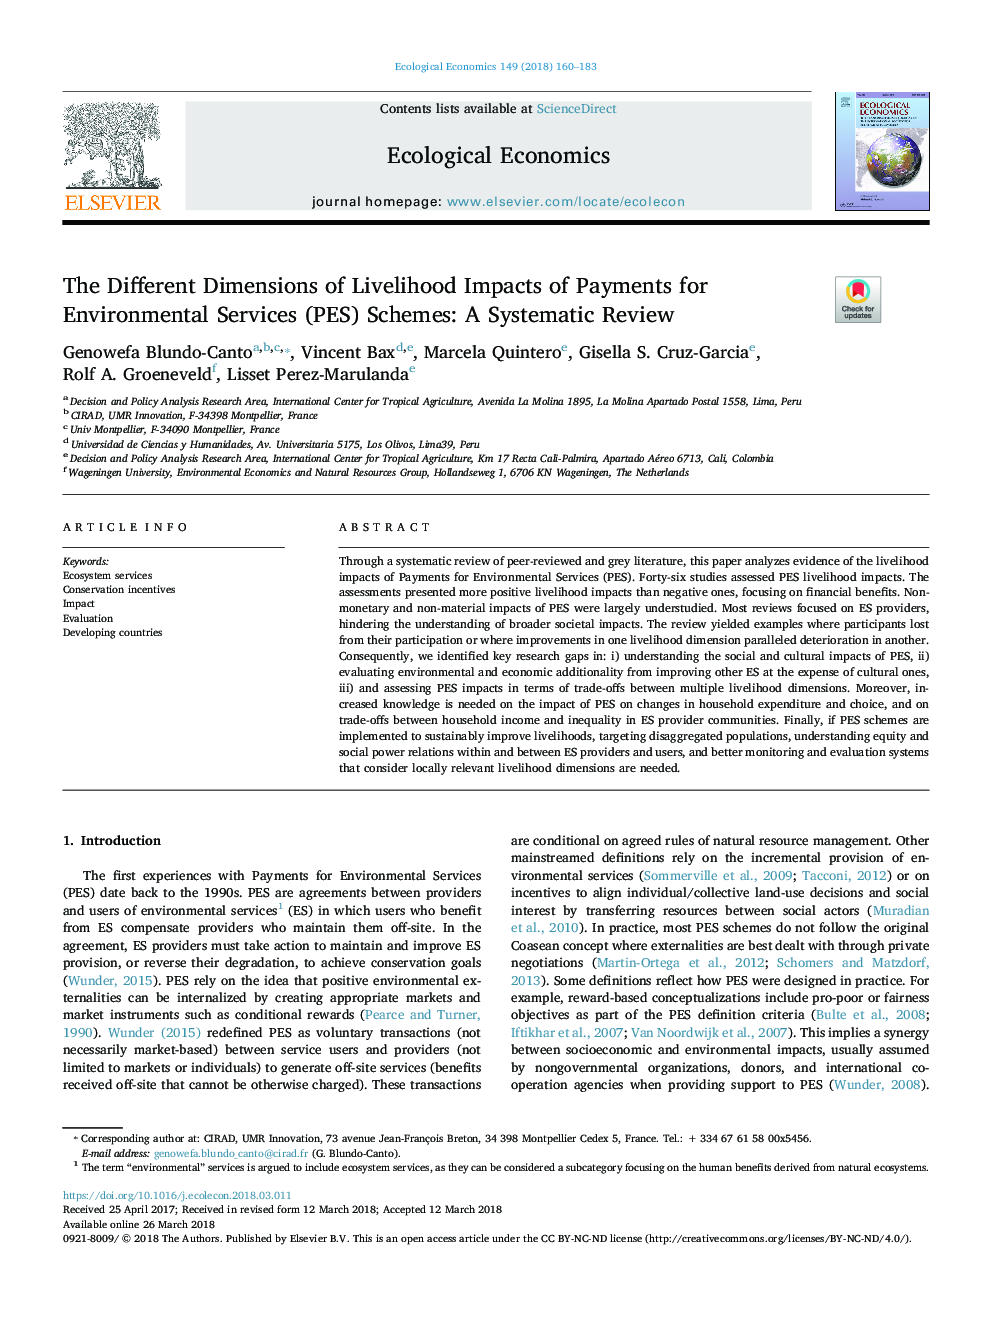 The Different Dimensions of Livelihood Impacts of Payments for Environmental Services (PES) Schemes: A Systematic Review